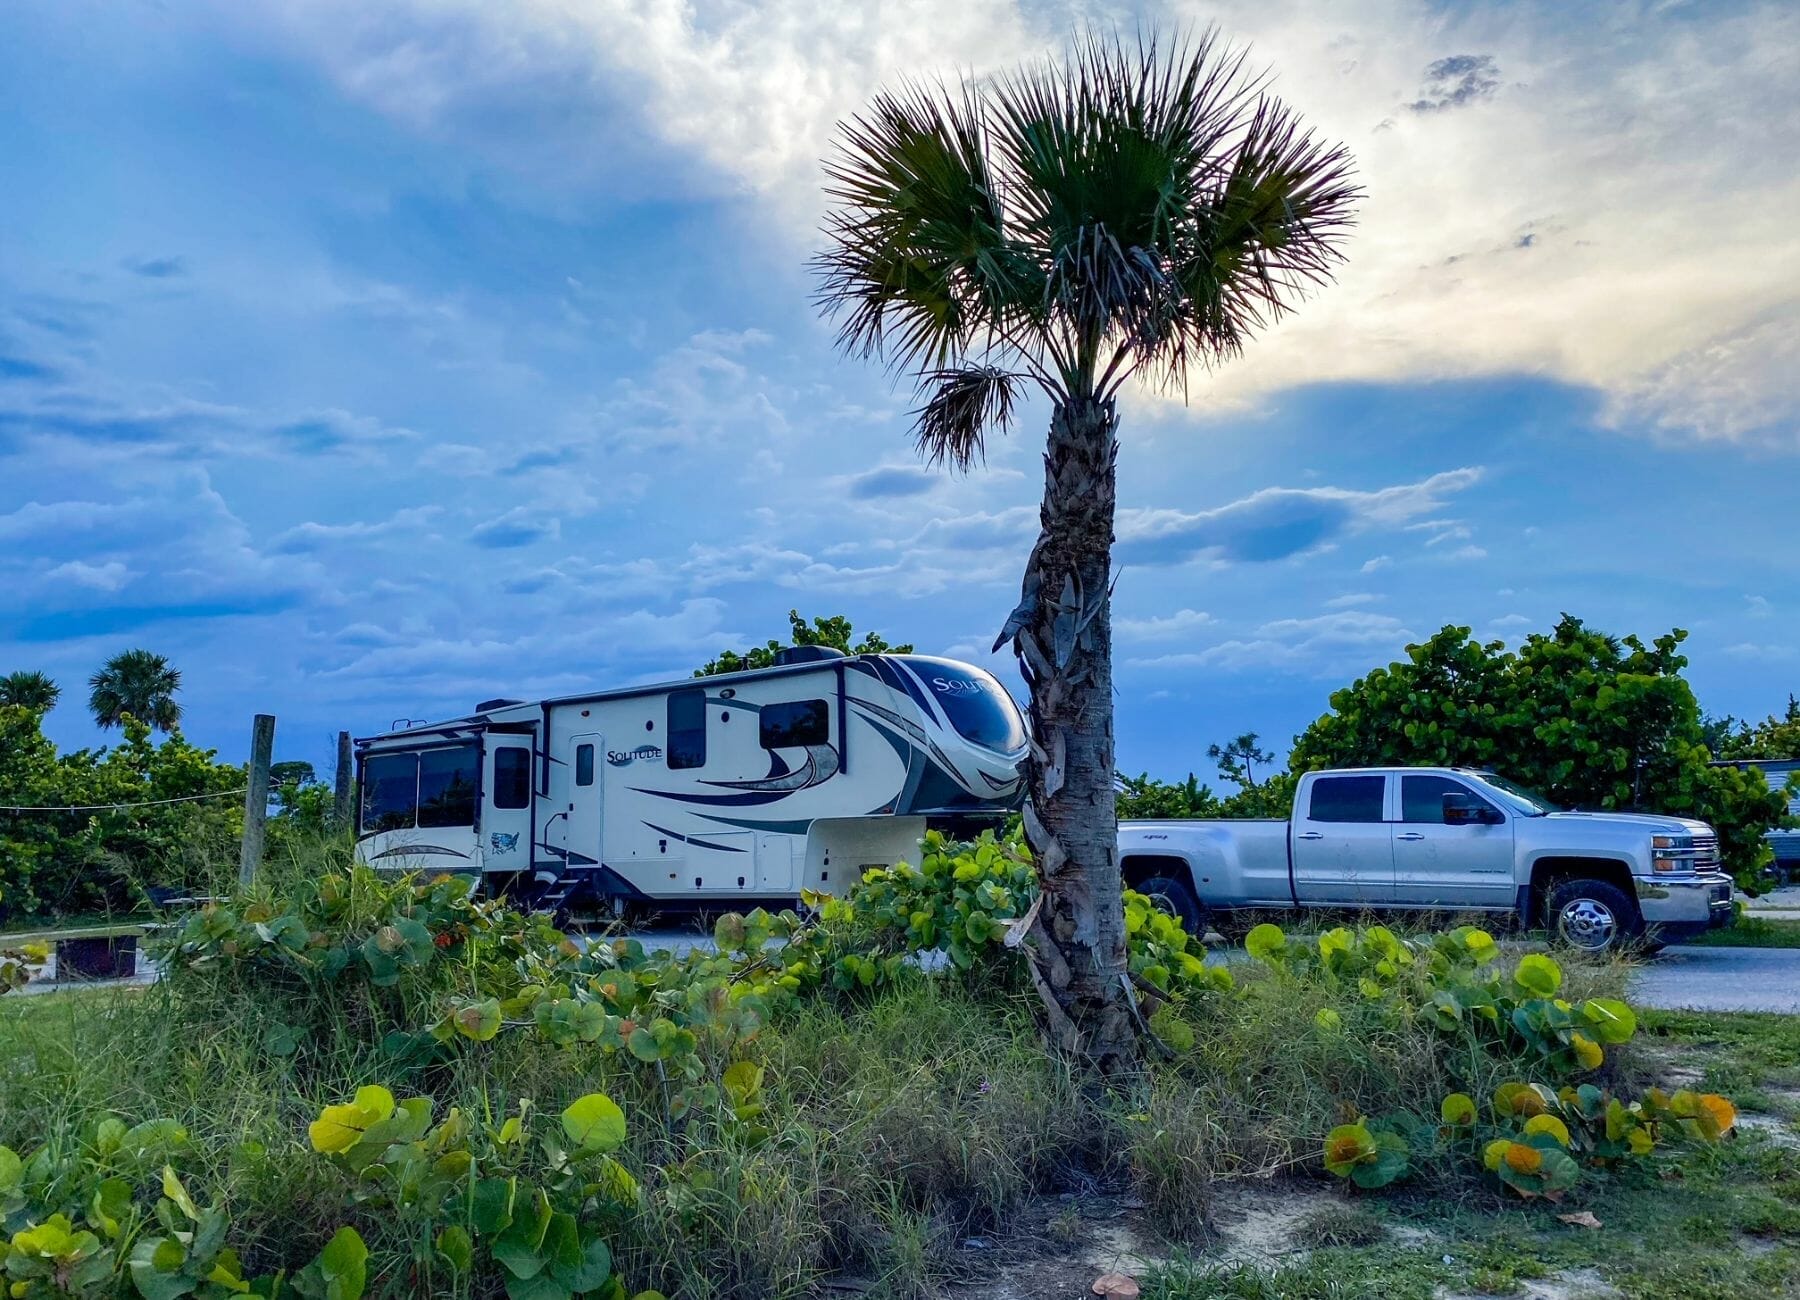 Shows an RV parked at Jonathan Dickinson Campground, Things to do in Jupiter Florida